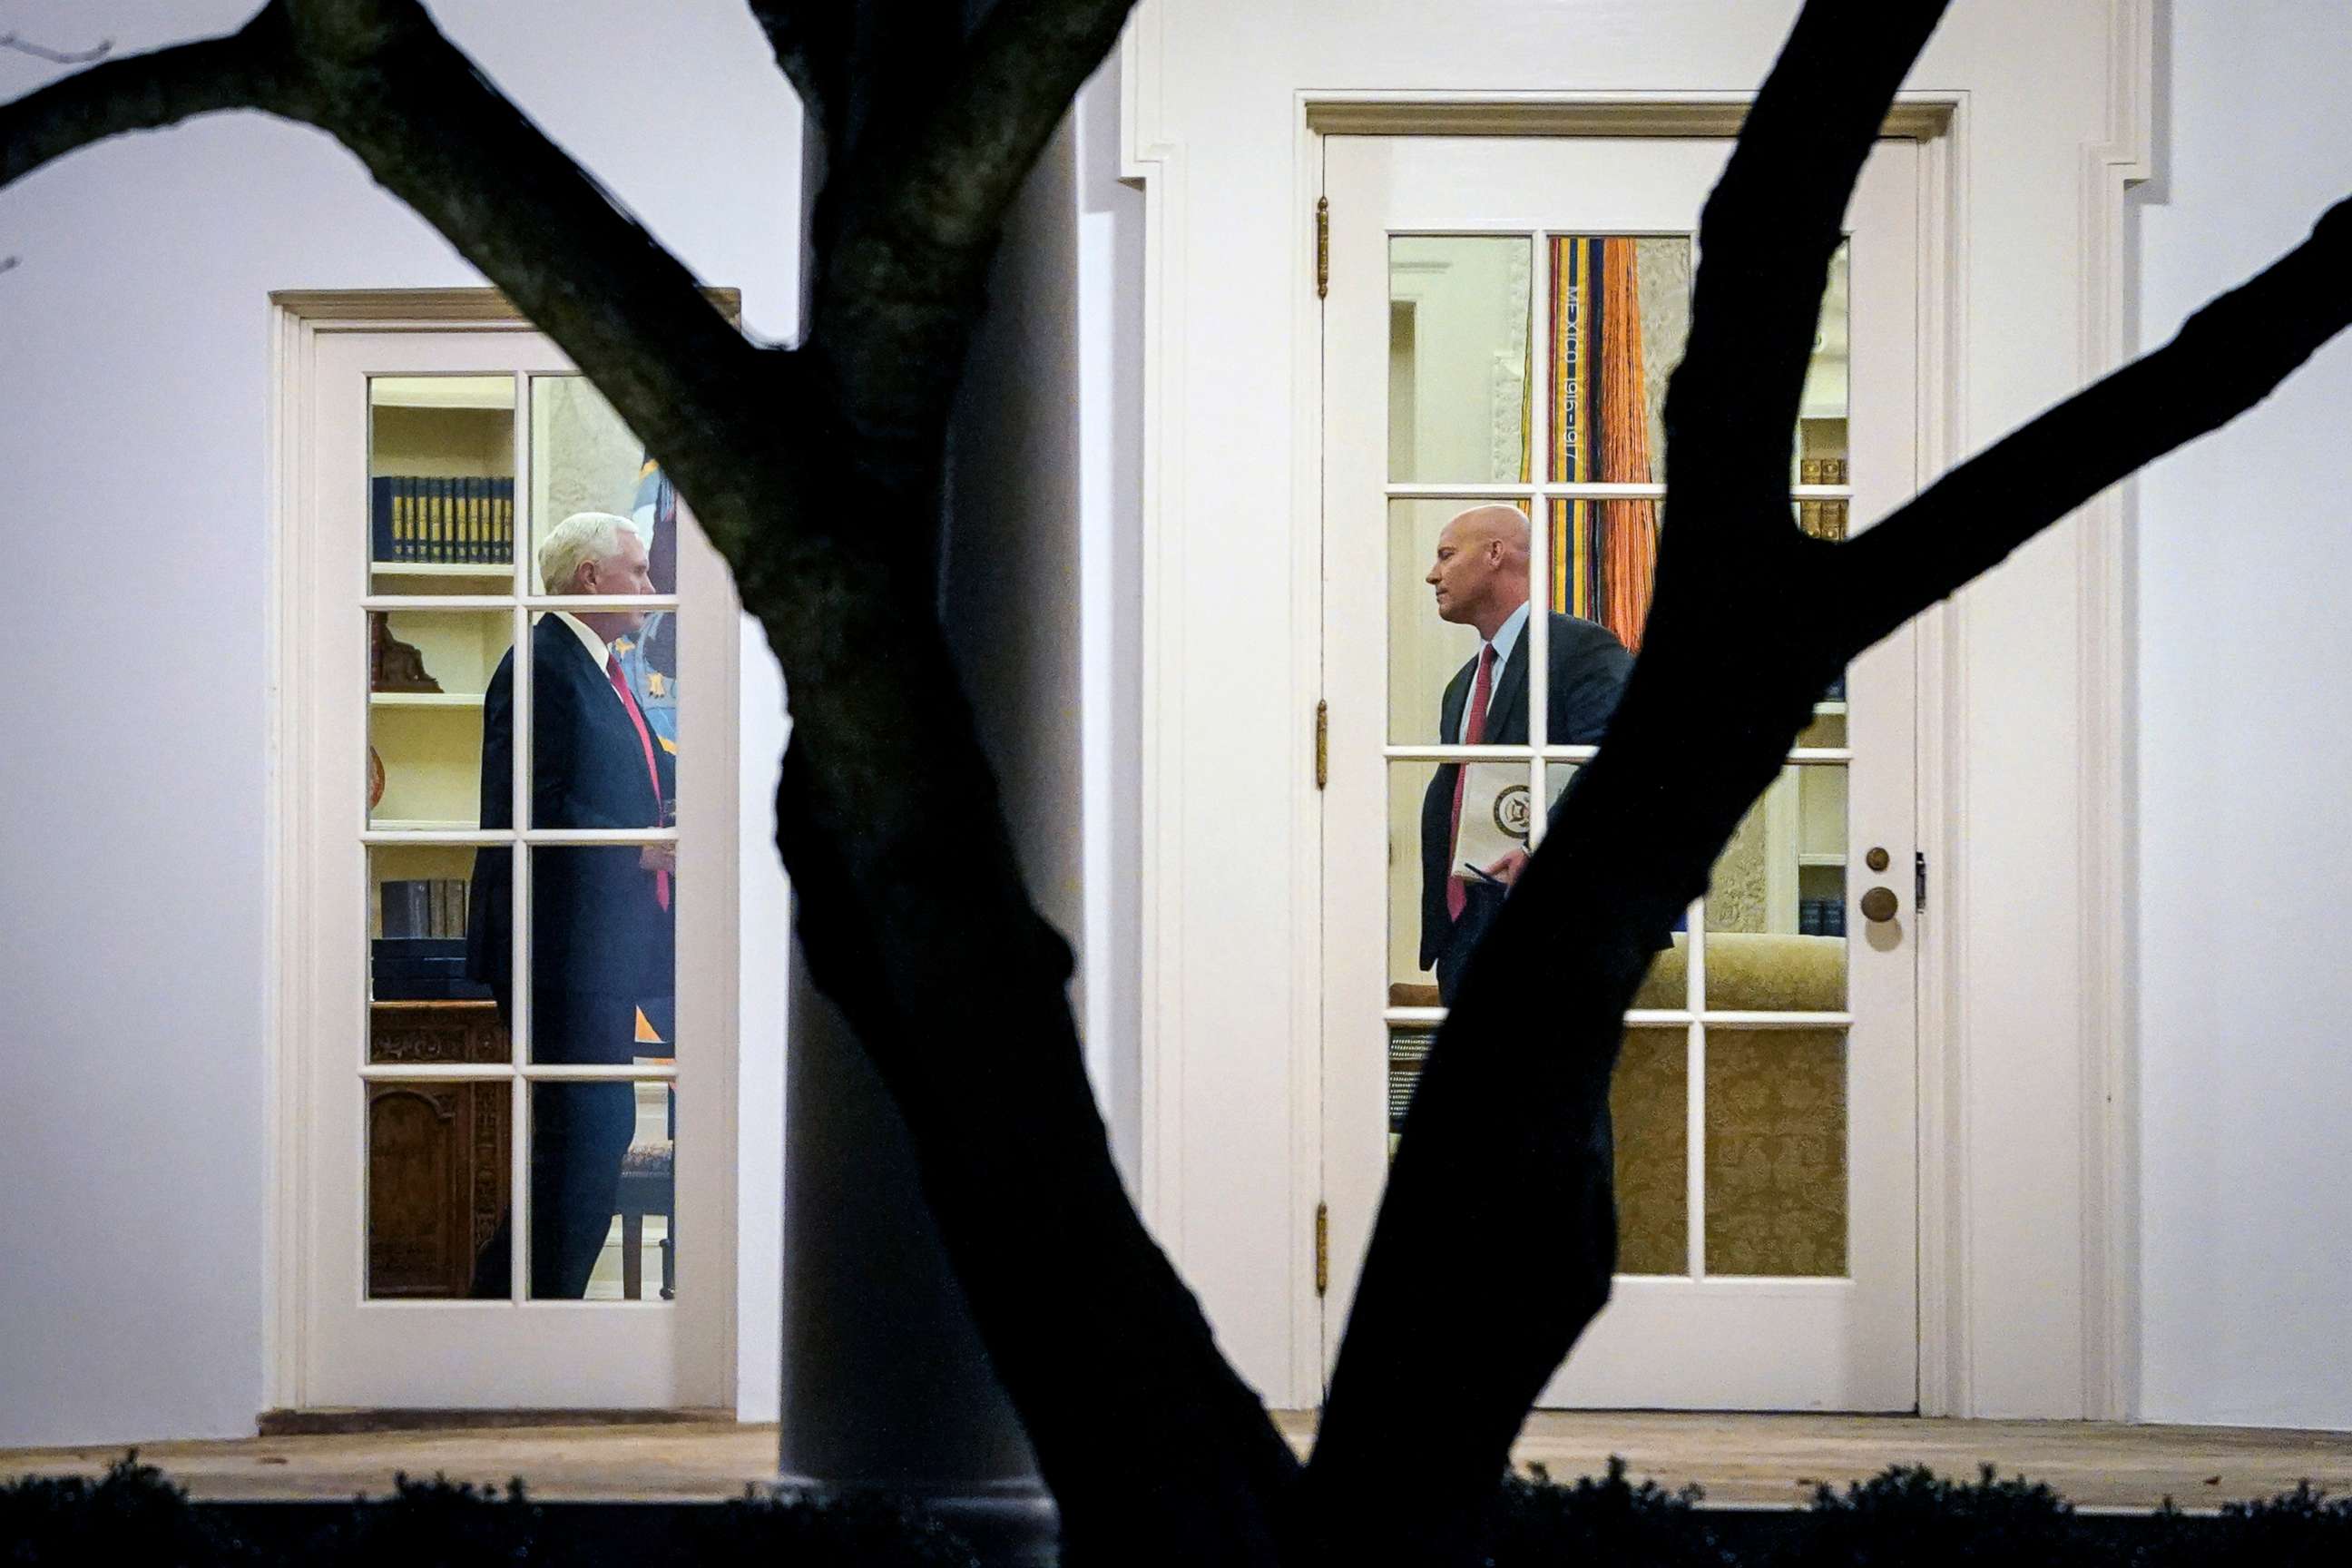 PHOTO: Vice President Mike Pence and his Chief of Staff Marc Short stand in the Oval Office before President Donald Trump departs the White House on Jan. 4, 2020 in Washington, D.C.